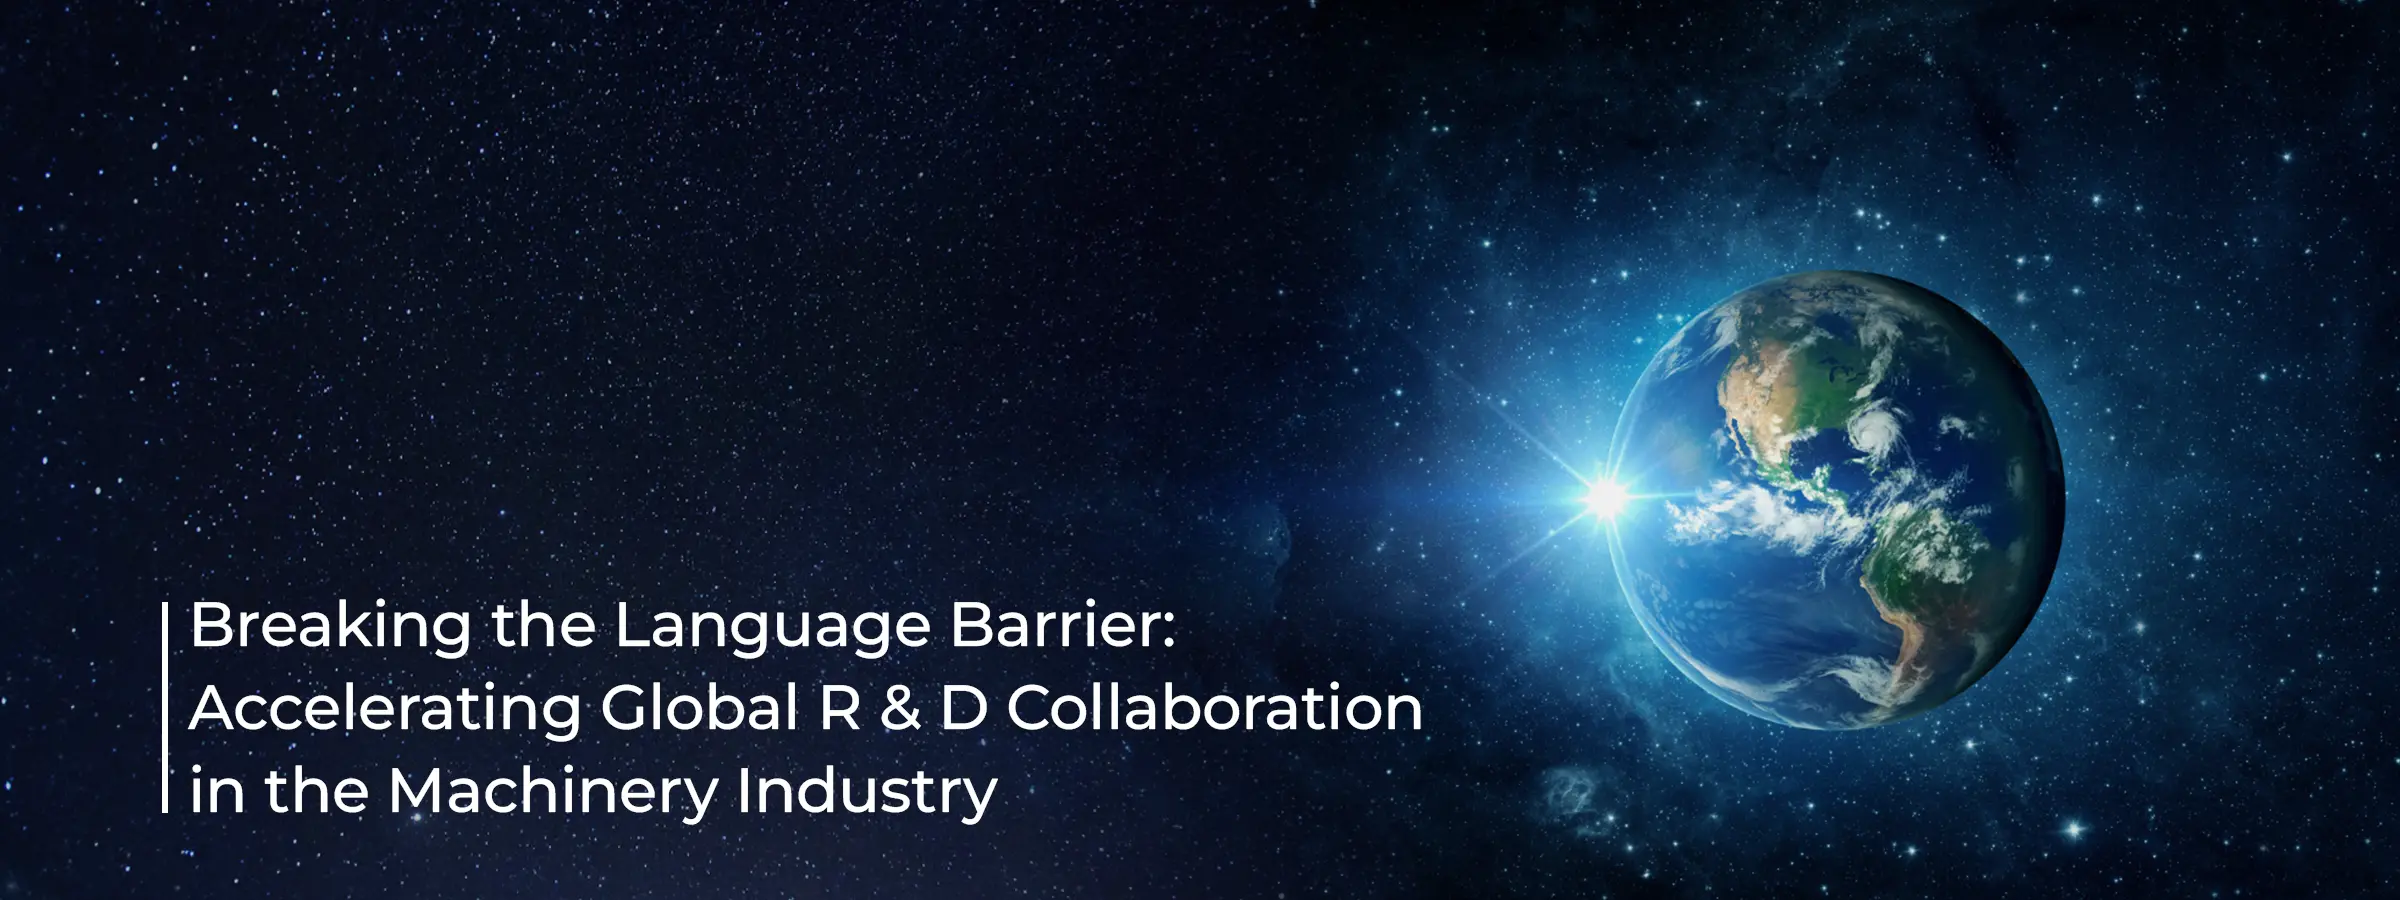 breaking-the-language-barrier-accelerating-global-rd-collaboration-in-the-machinery-industry